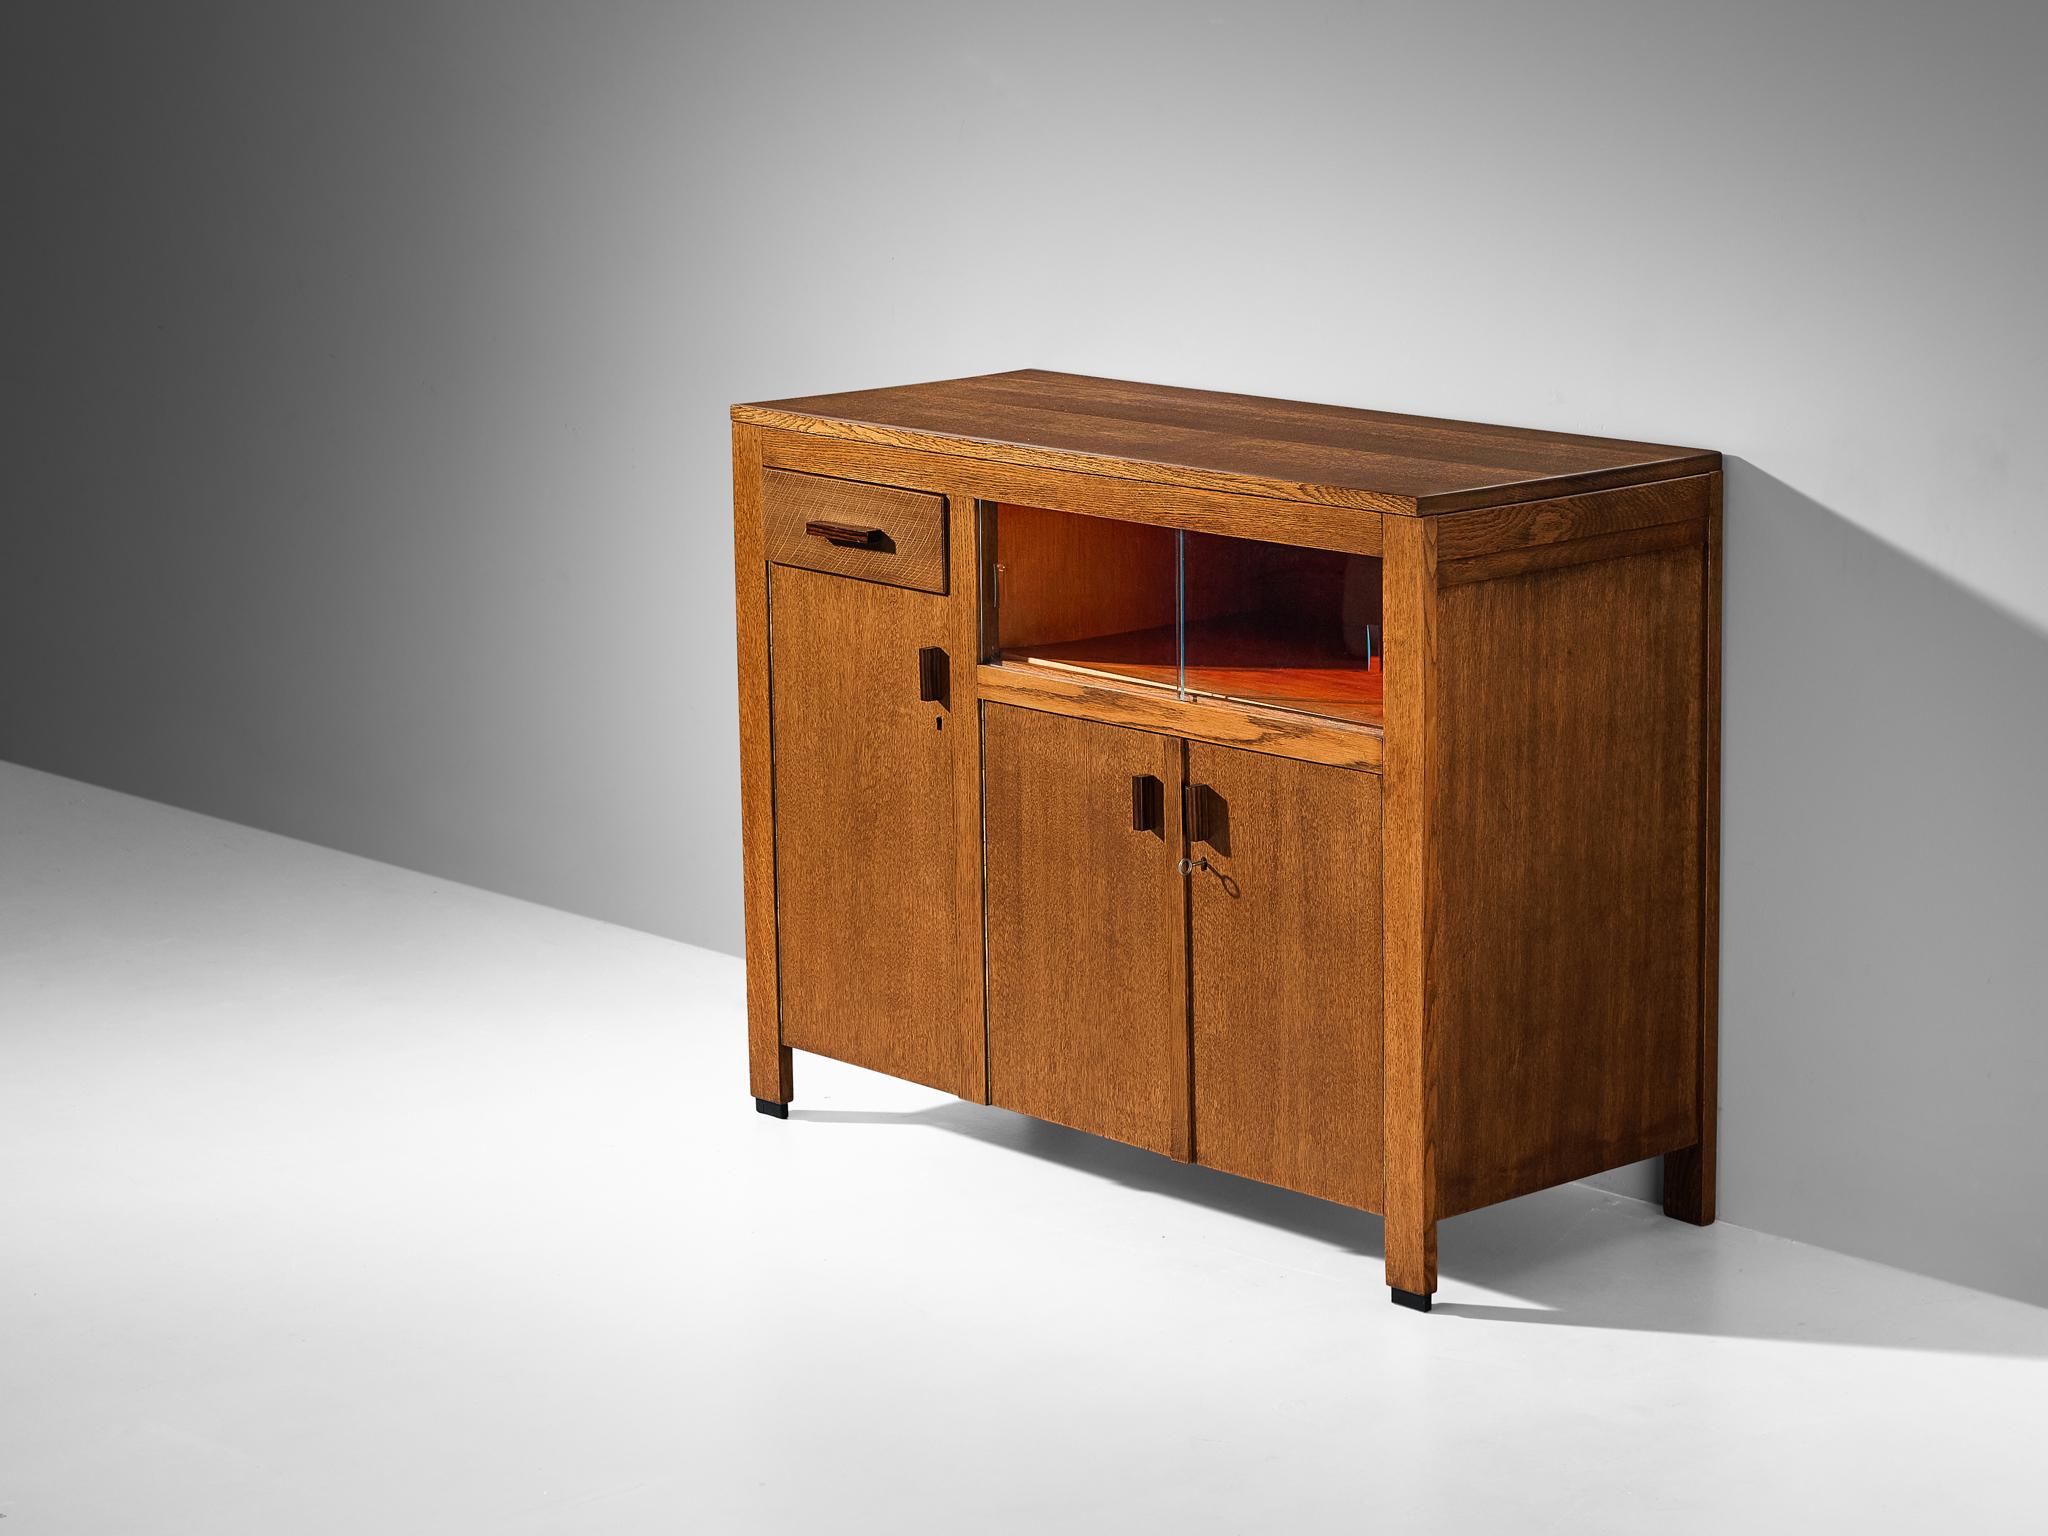 Art Deco sideboard, oak, coromandel, glass, Netherlands, 1930s

Elegant 'De Amsterdamse School' sideboard. This sideboard has a modest design with some characteristic elements to give it it's unique appearance. The sideboard is equipped with three